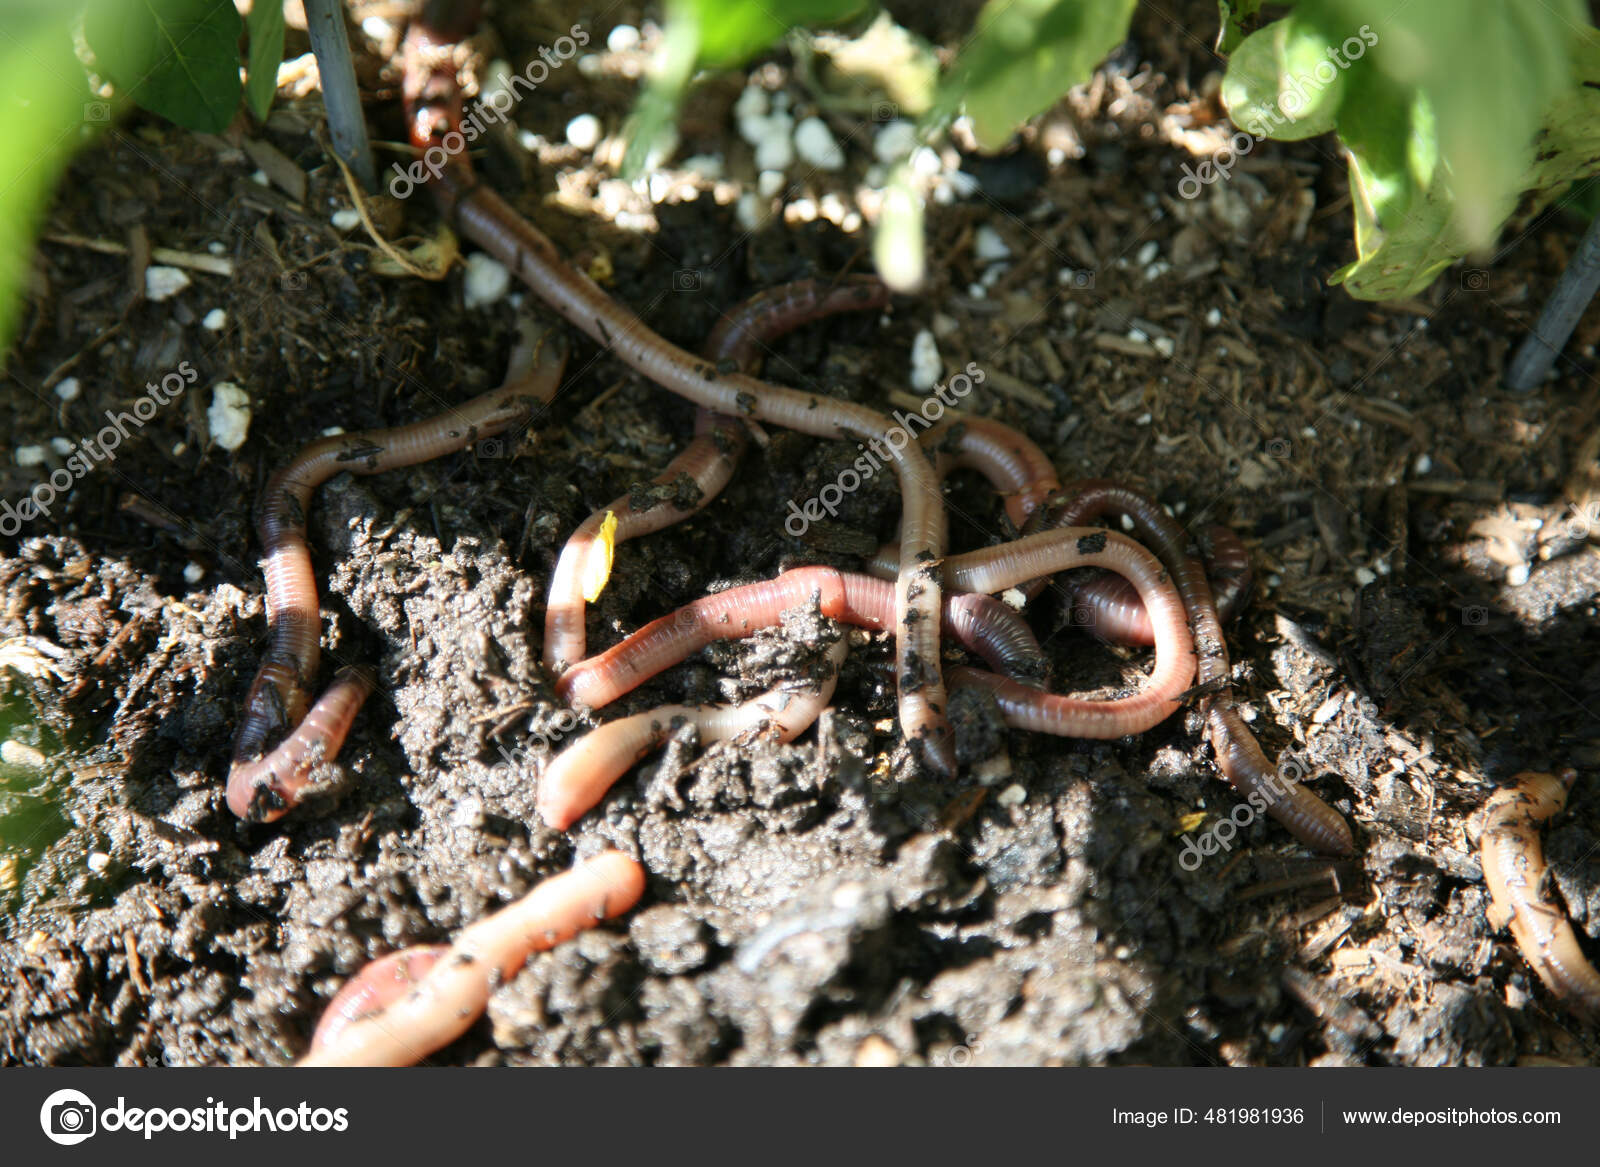 Groups Of Earthworm African Night Crawler On The Ground Stock